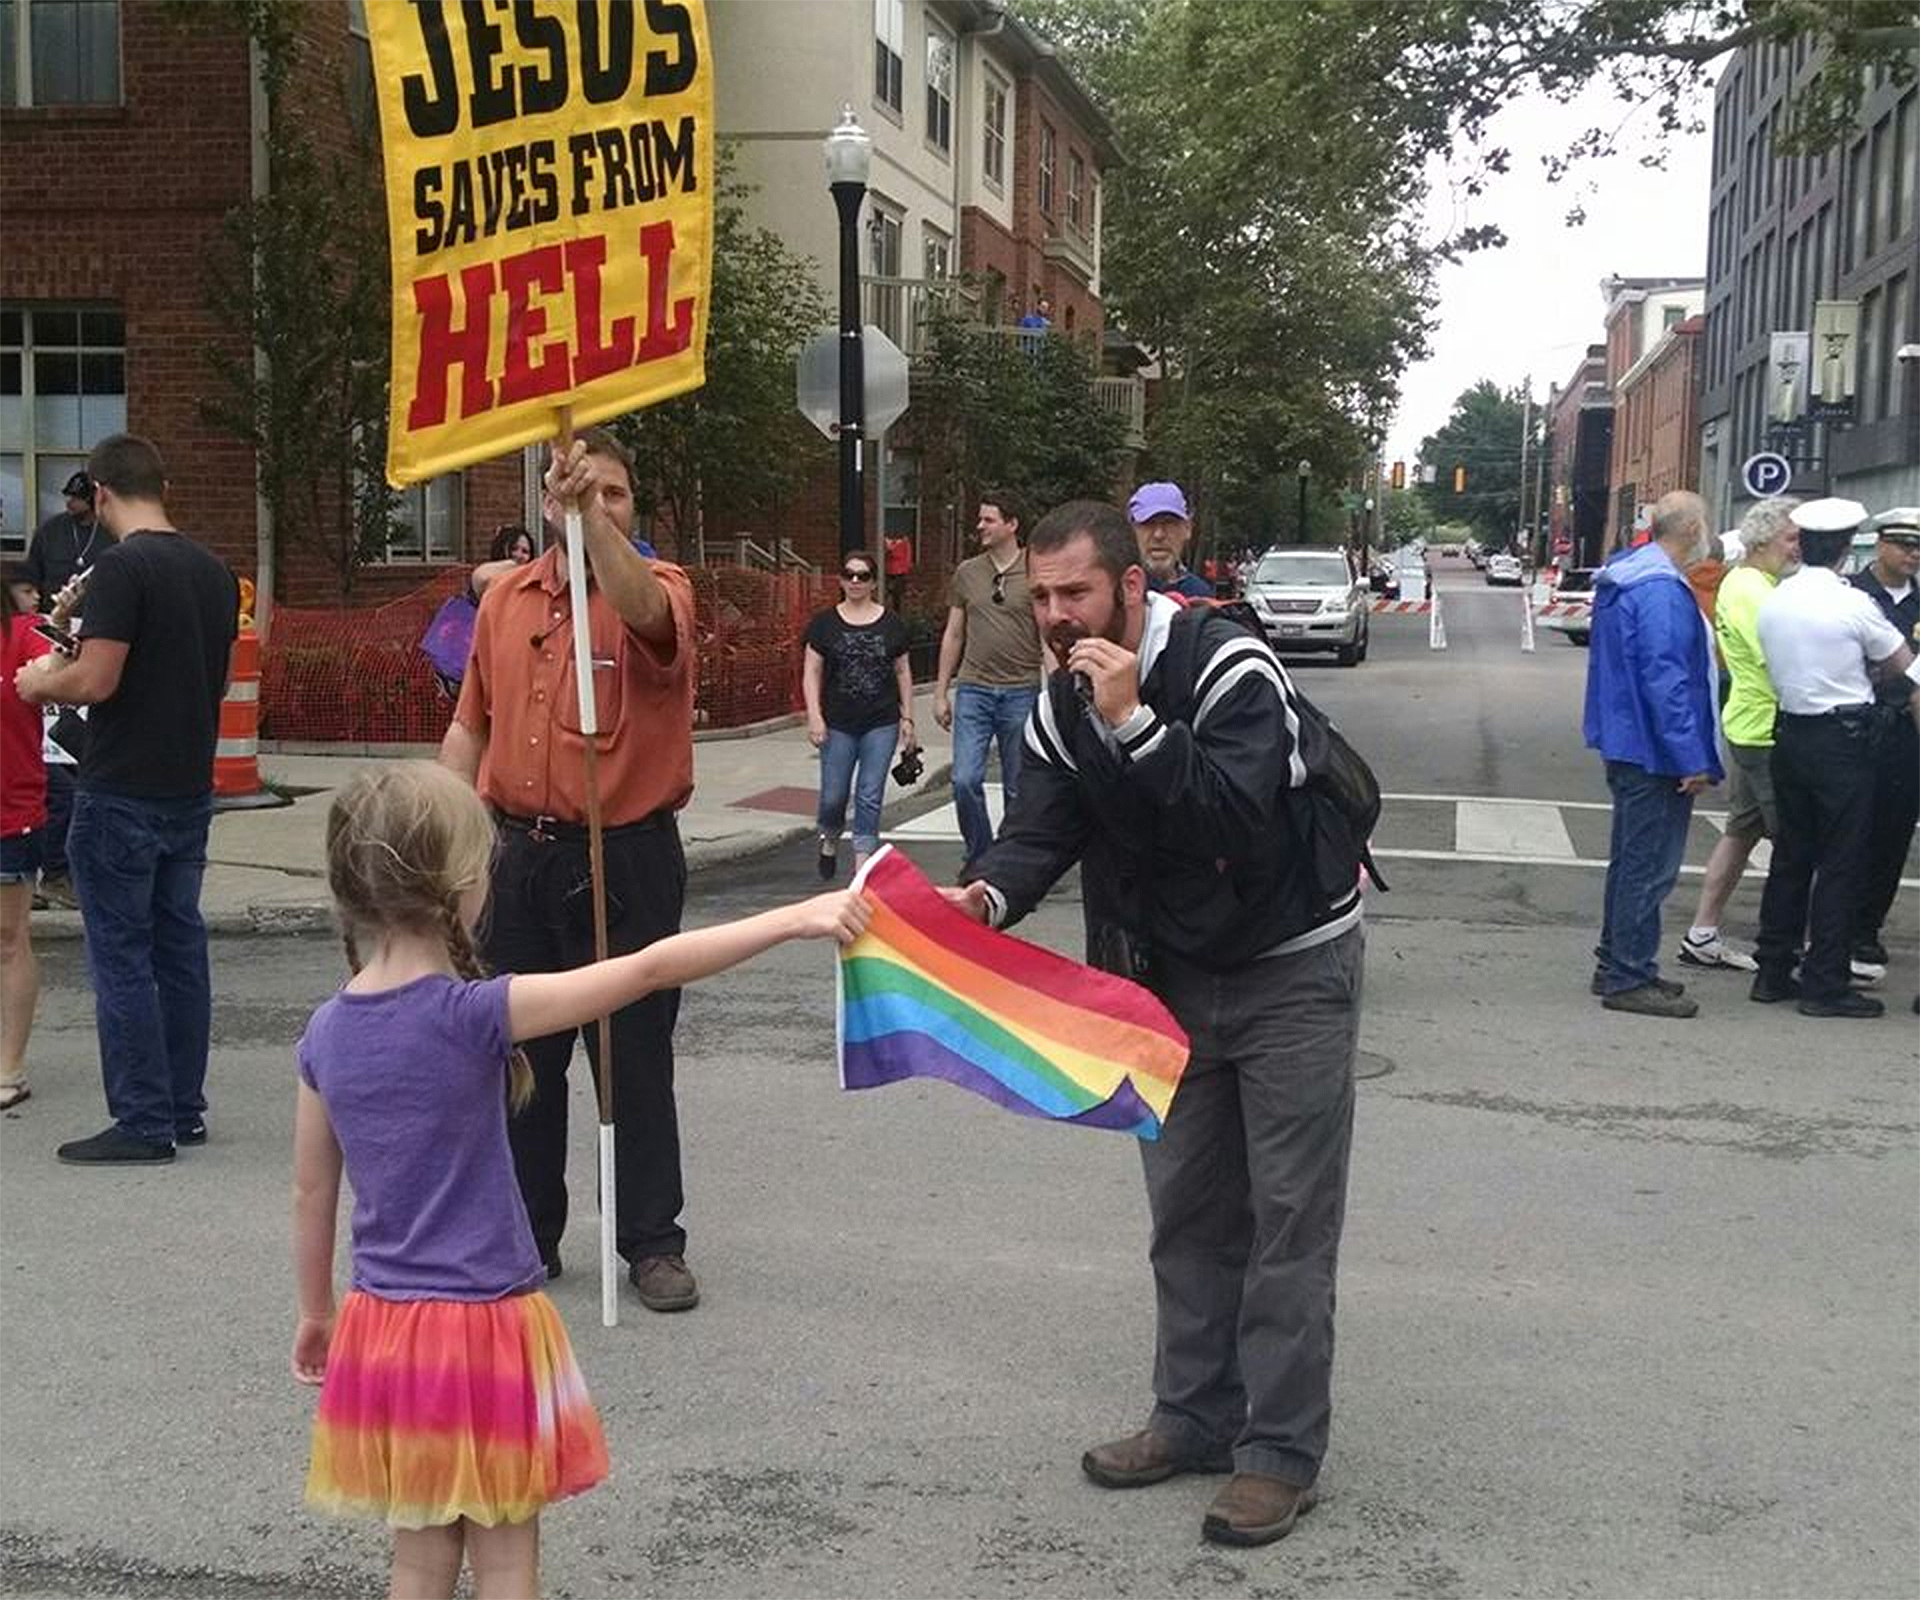 WATCH: The amazing moment this little girl stands up to an anti-gay preacher